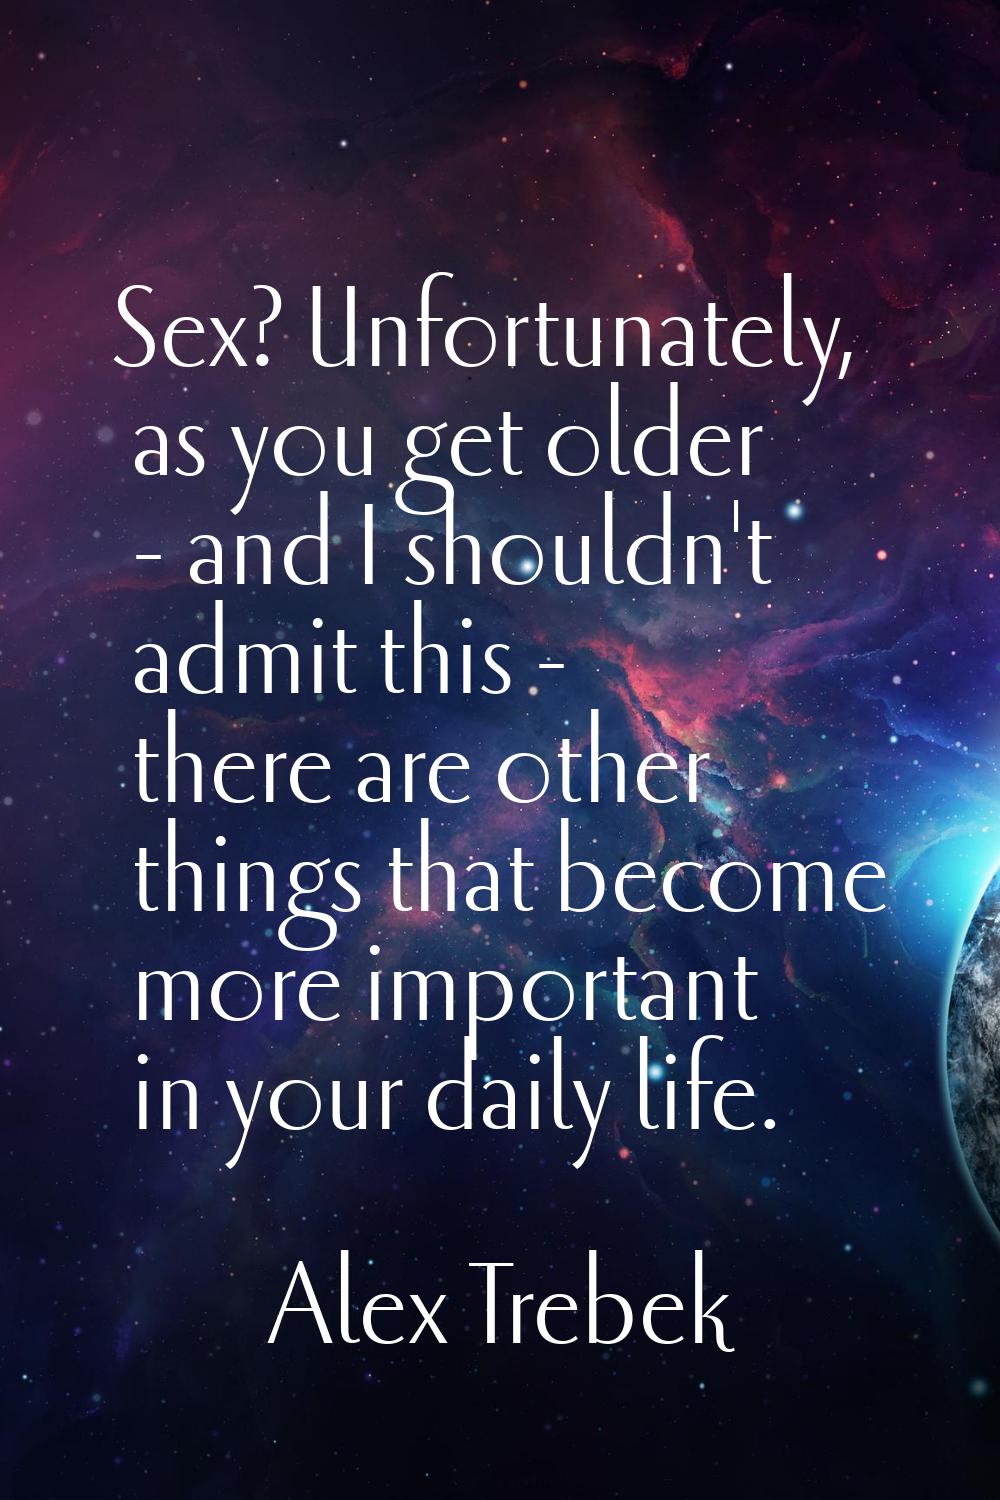 Sex? Unfortunately, as you get older - and I shouldn't admit this - there are other things that bec